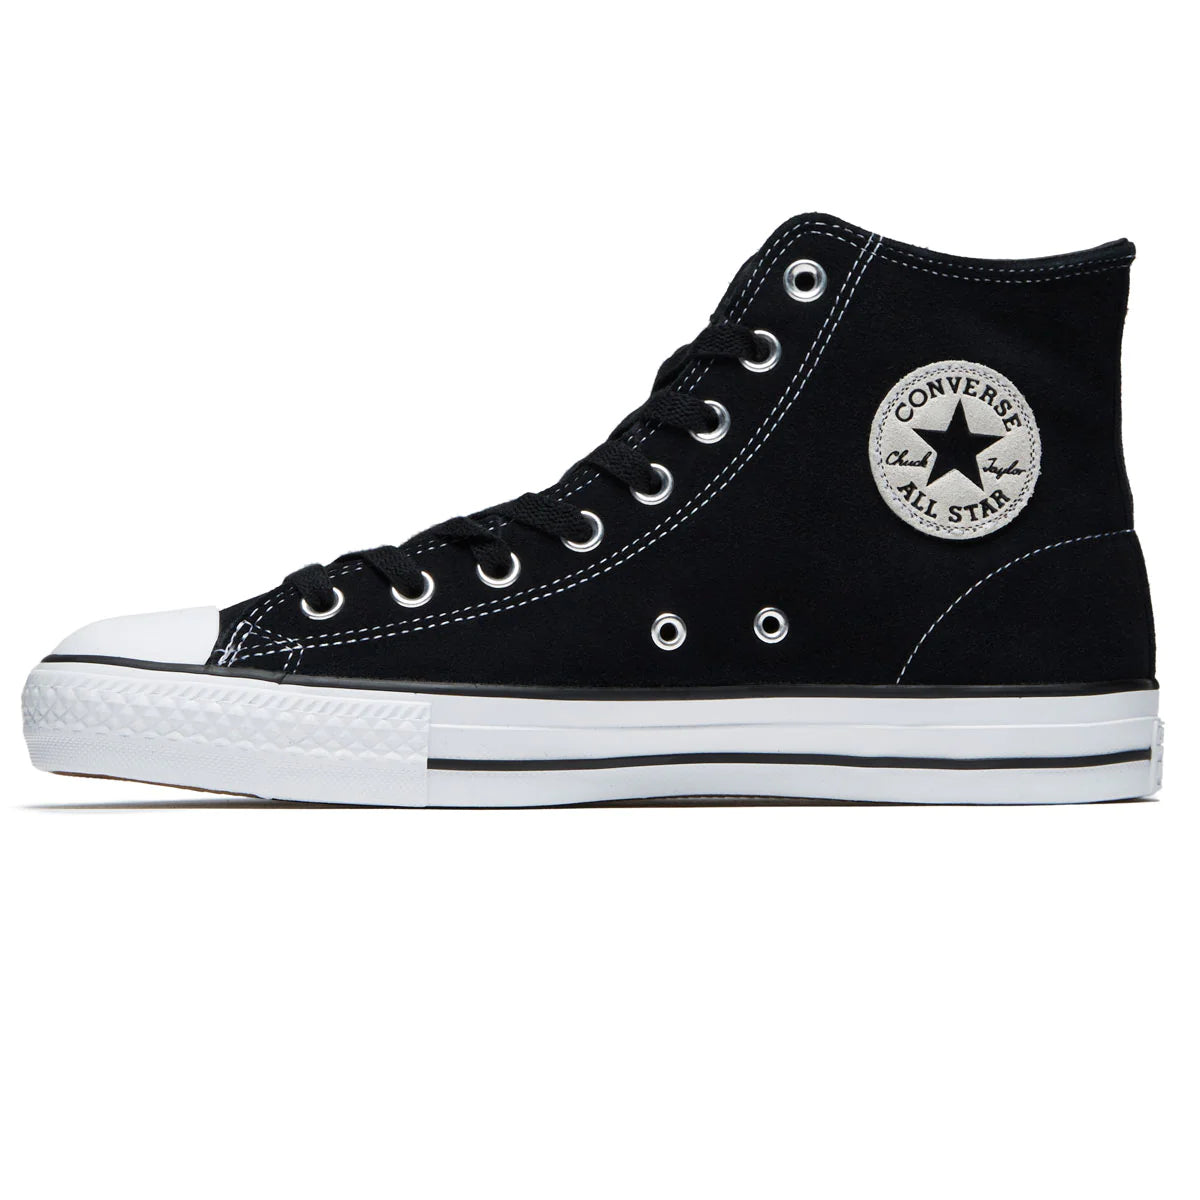 Converse Chuck Taylor All Star Pro Suede Hi Shoes